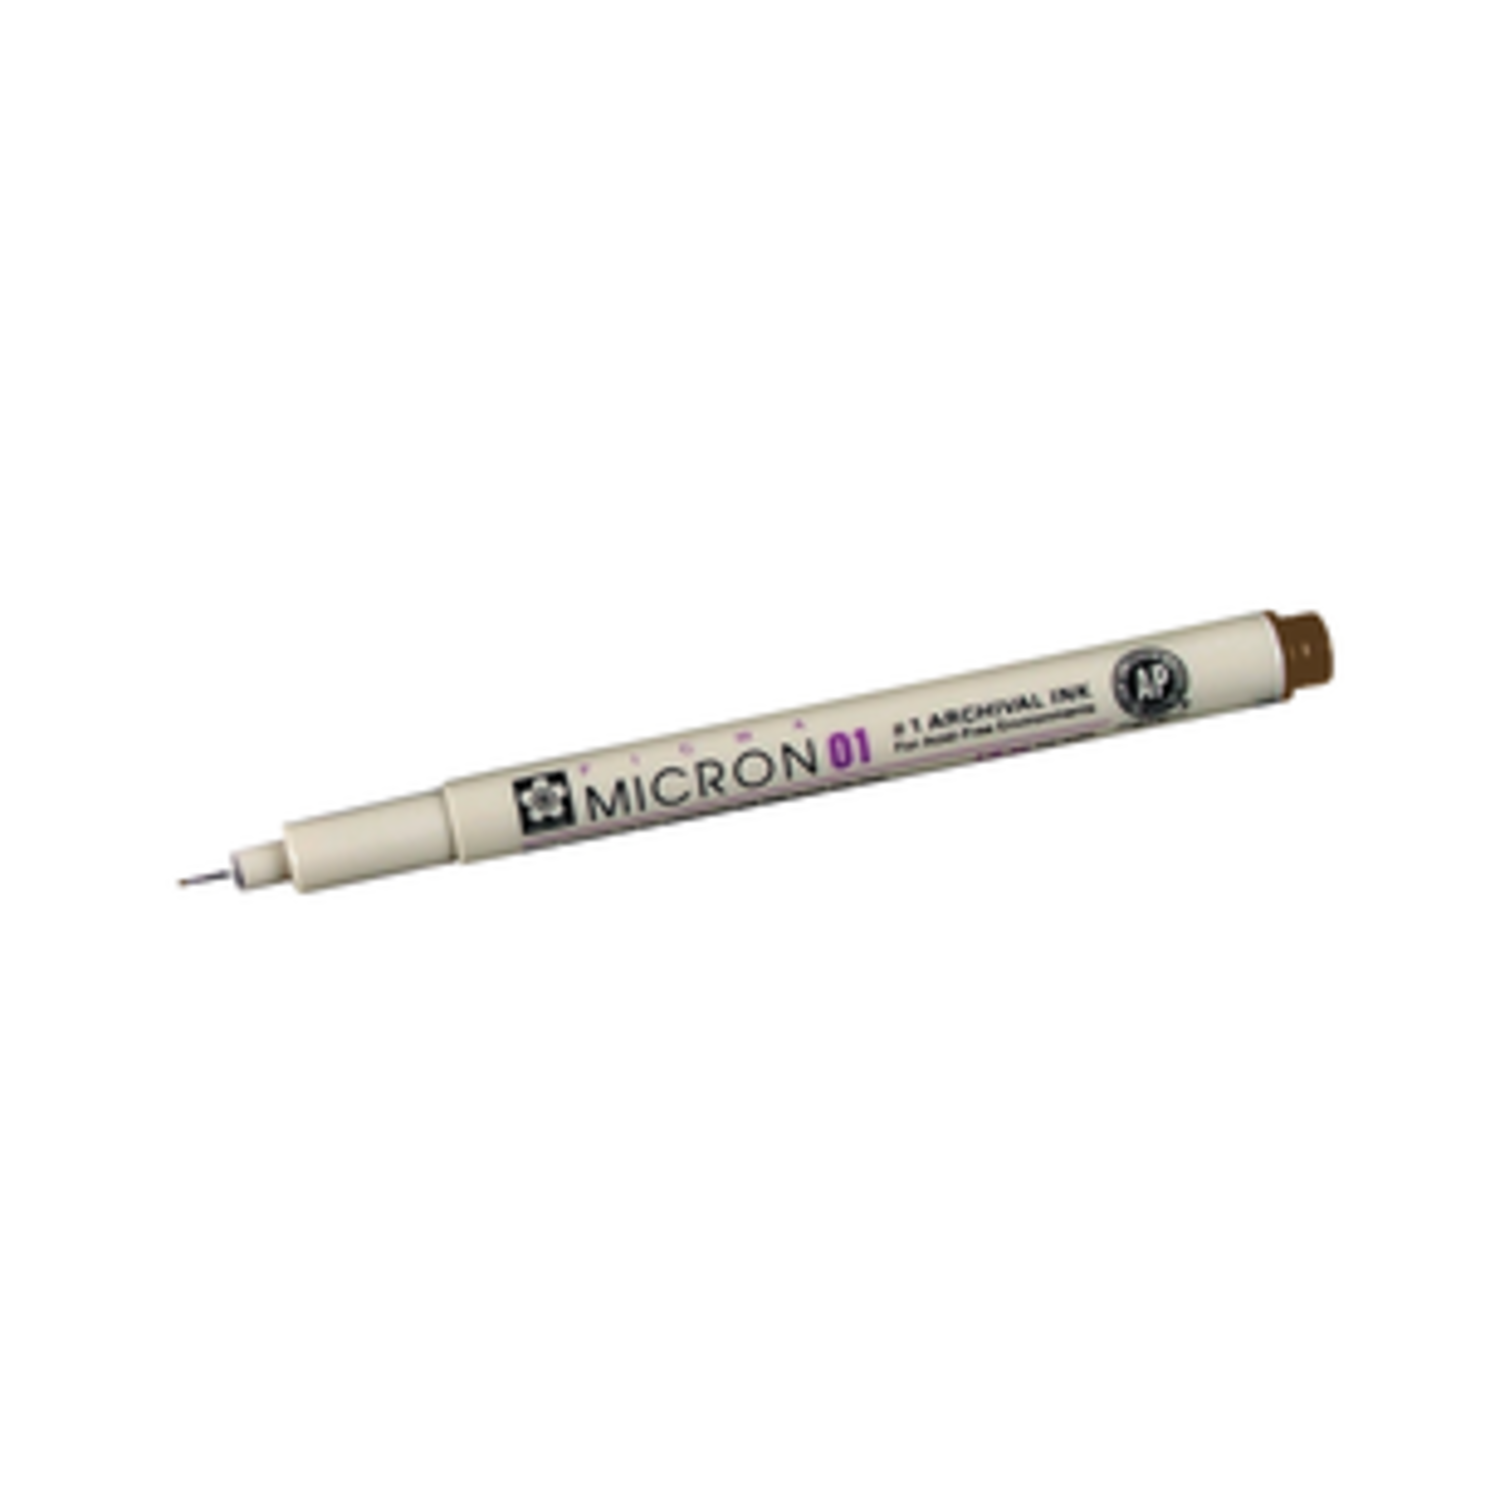 Pigma Micron Pen Black .25mm Size 01 Carded - 053482301813